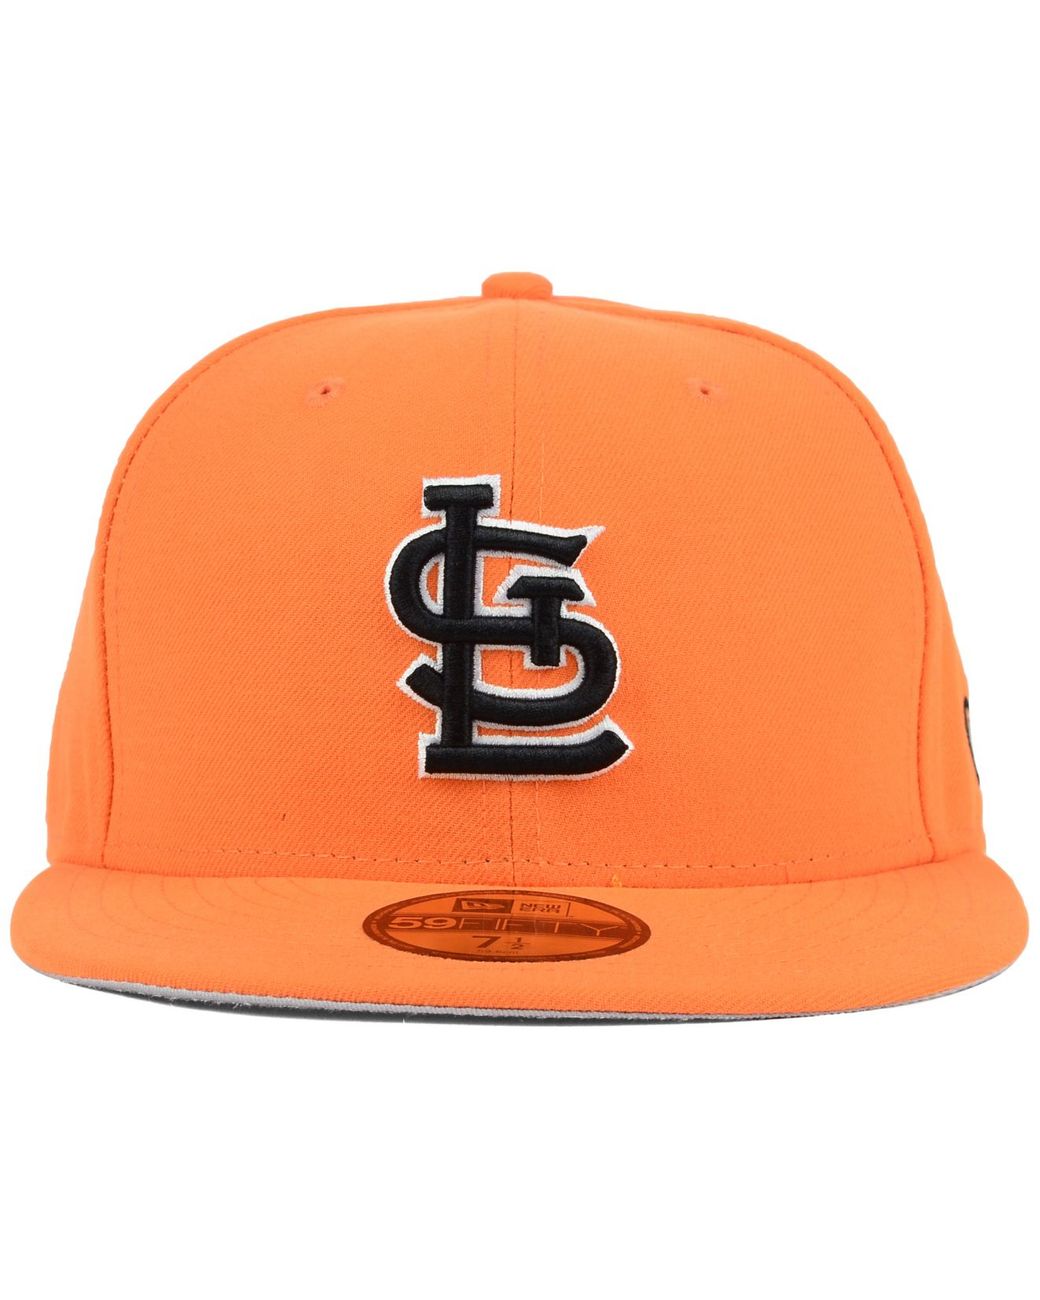 Just Caps Rust Orange St. Louis Cardinals 59FIFTY Fitted Hat – New Era Cap